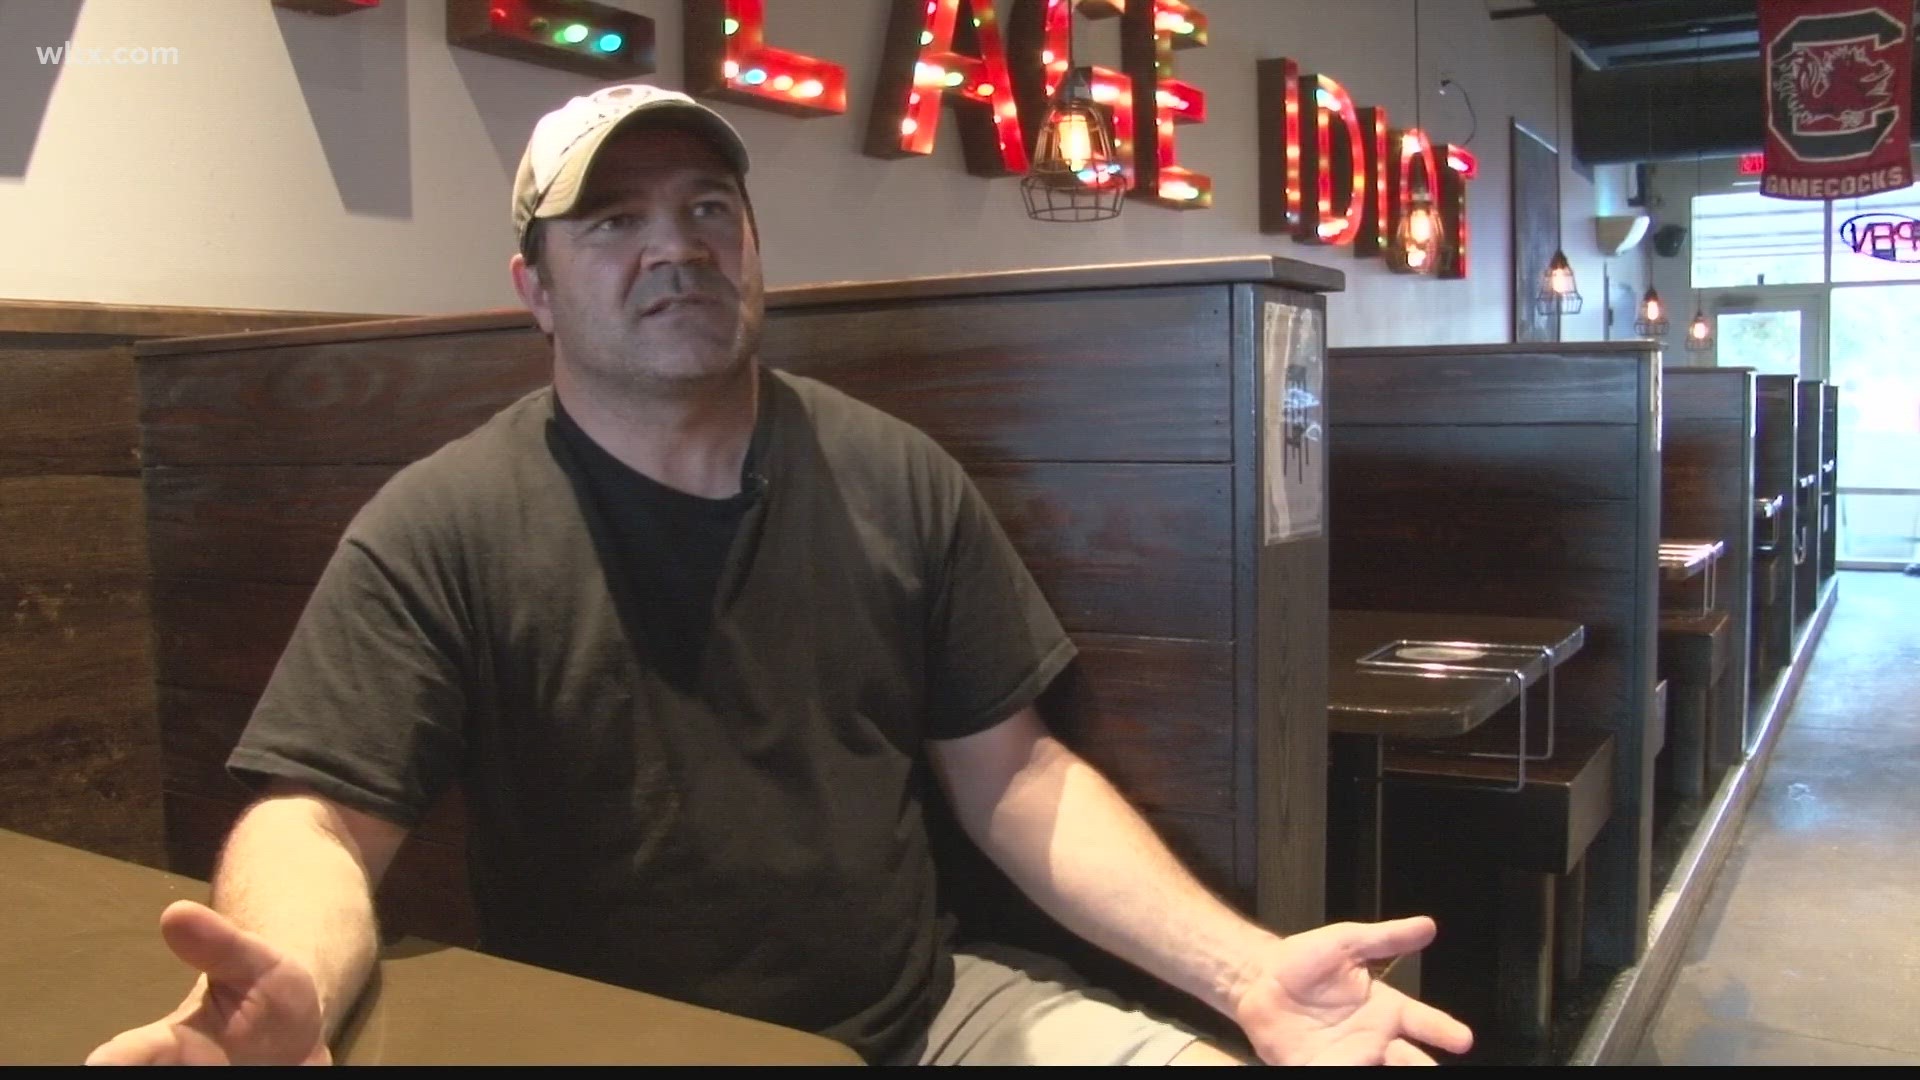 Locally owned and operated Village Idiot pizza announced the company wants to expand business through offering franchise investment opportunities